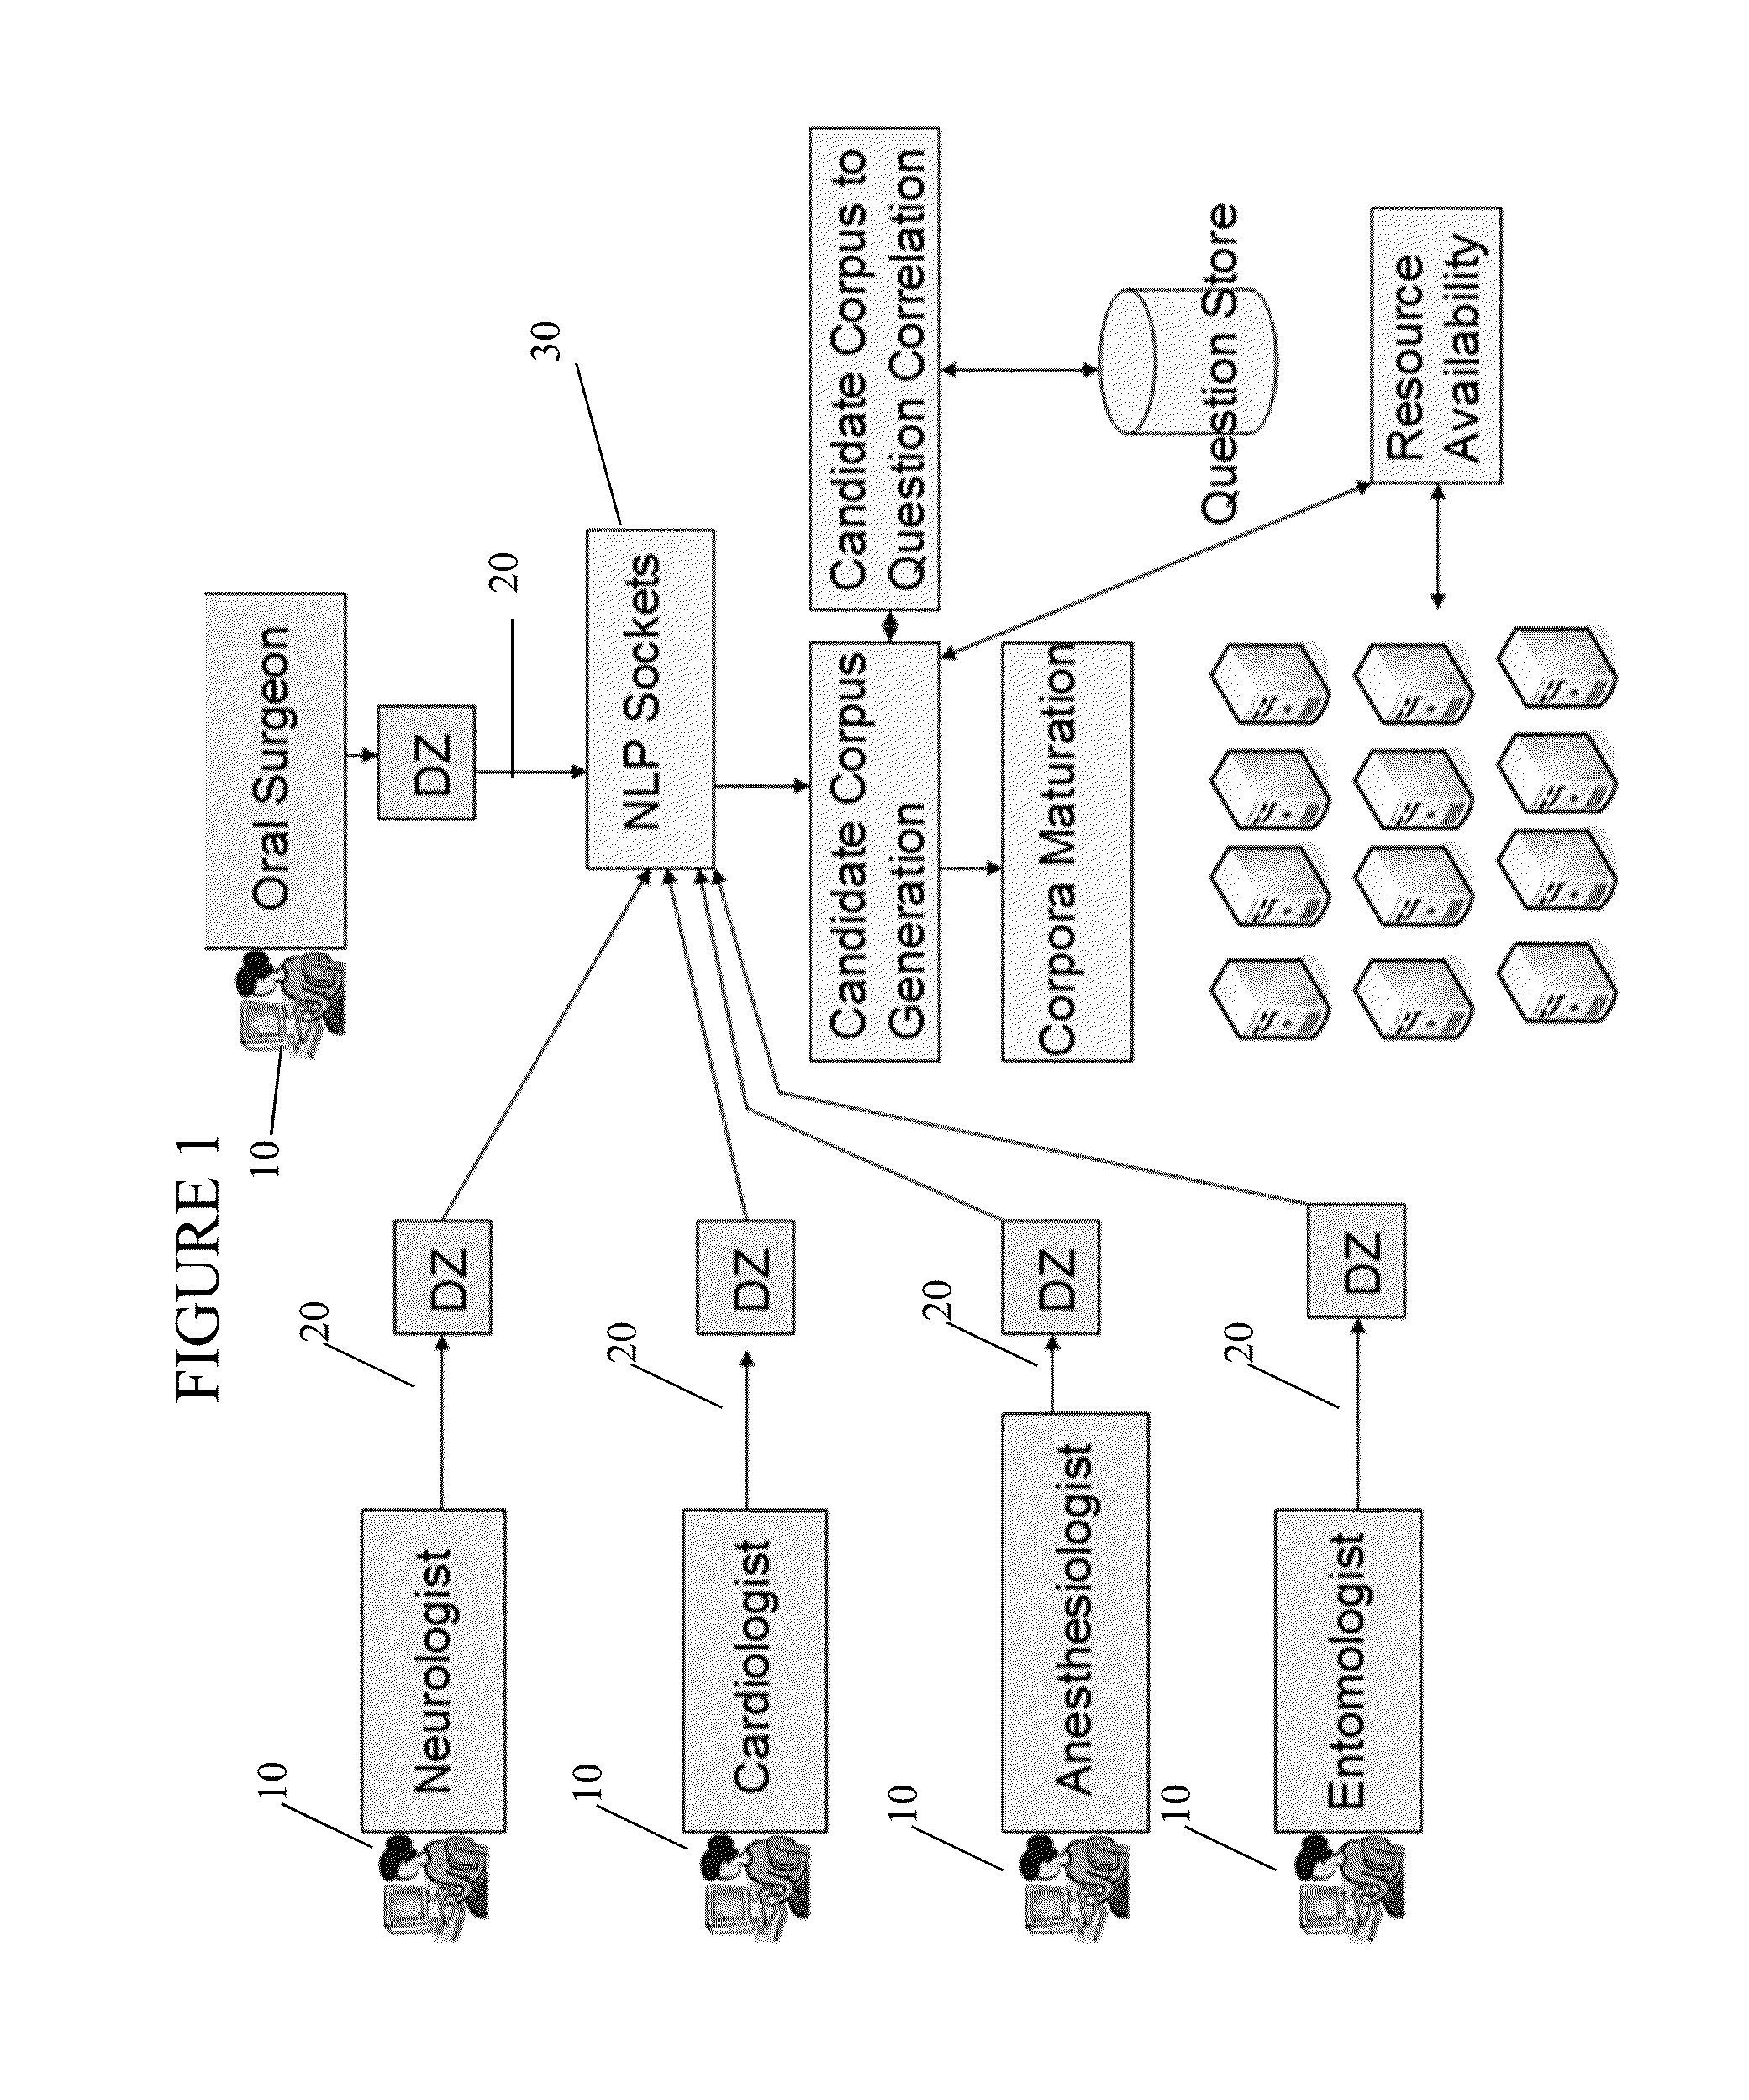 System and method for an expert question answer system from a dynamic corpus